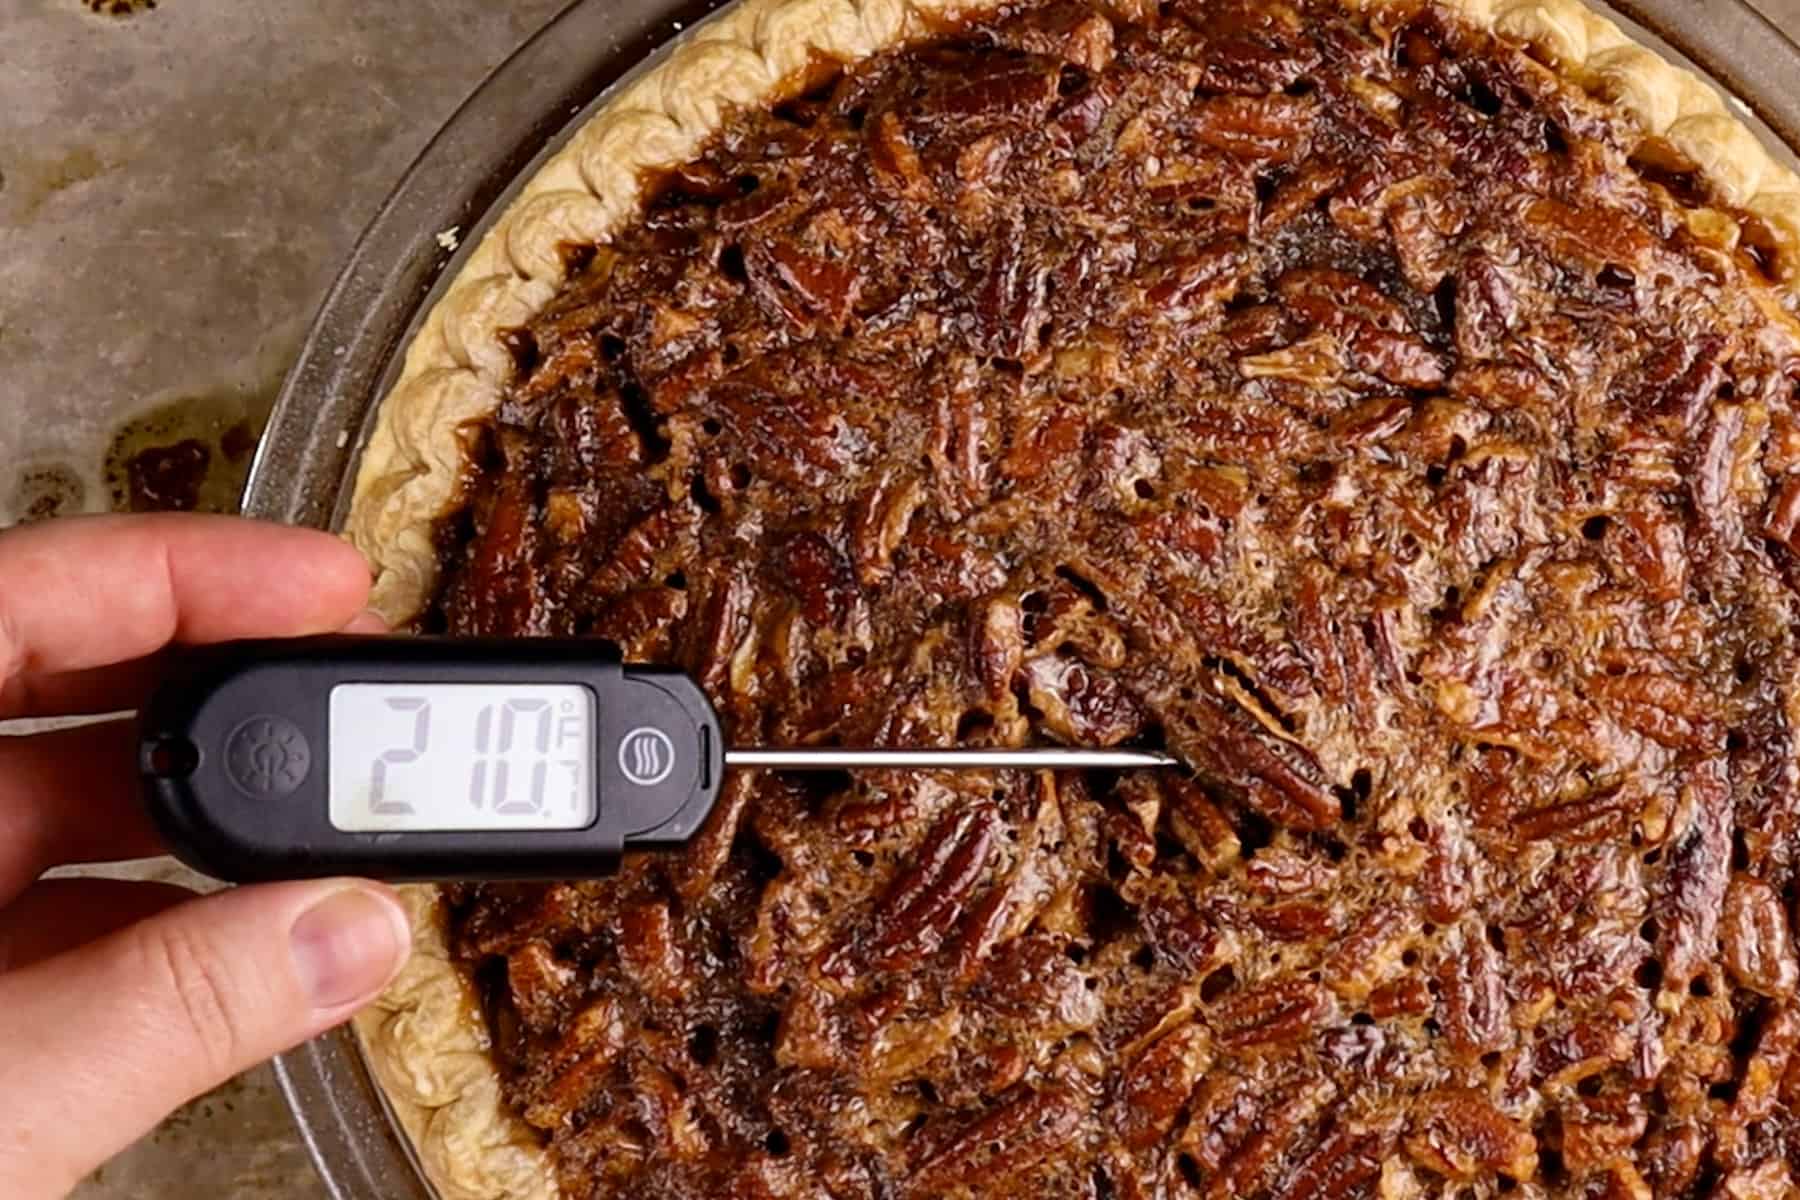 thermometer inserted in pie showing 210°F